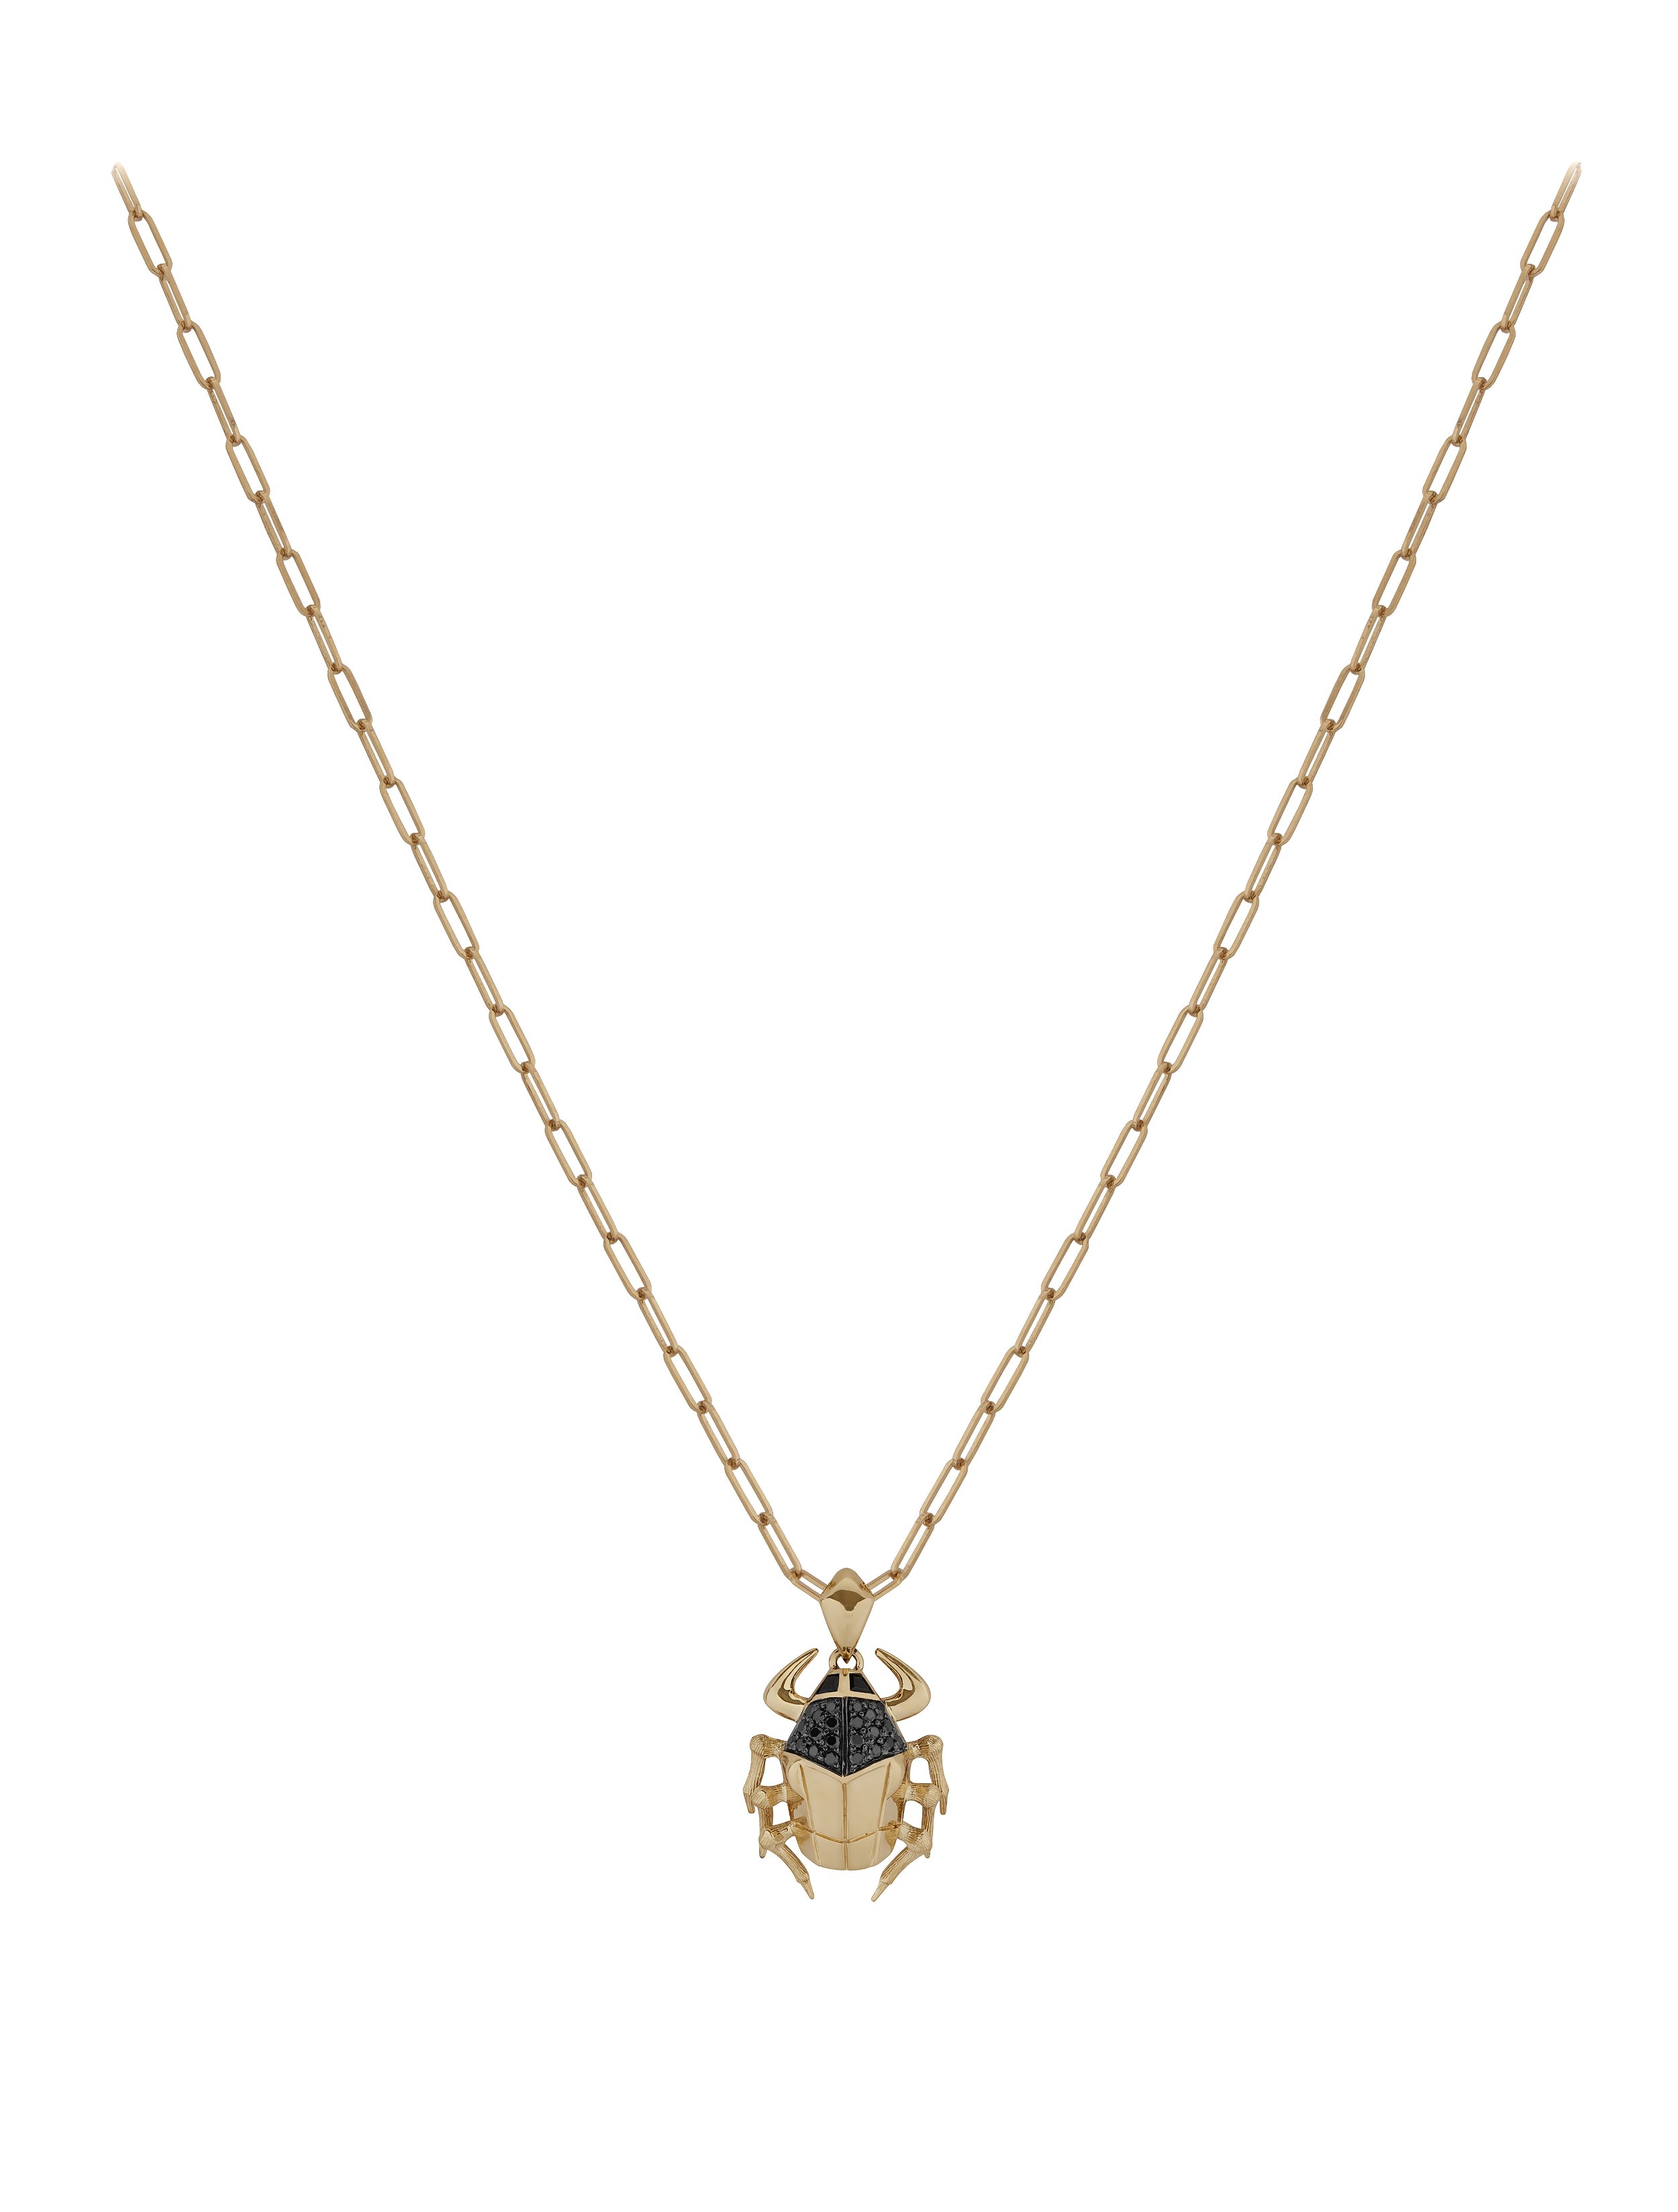 No Regrets Jitterbug Toro Beetle Pendant Necklace with Black Diamond and Black Spinel in 18kt Yellow Gold